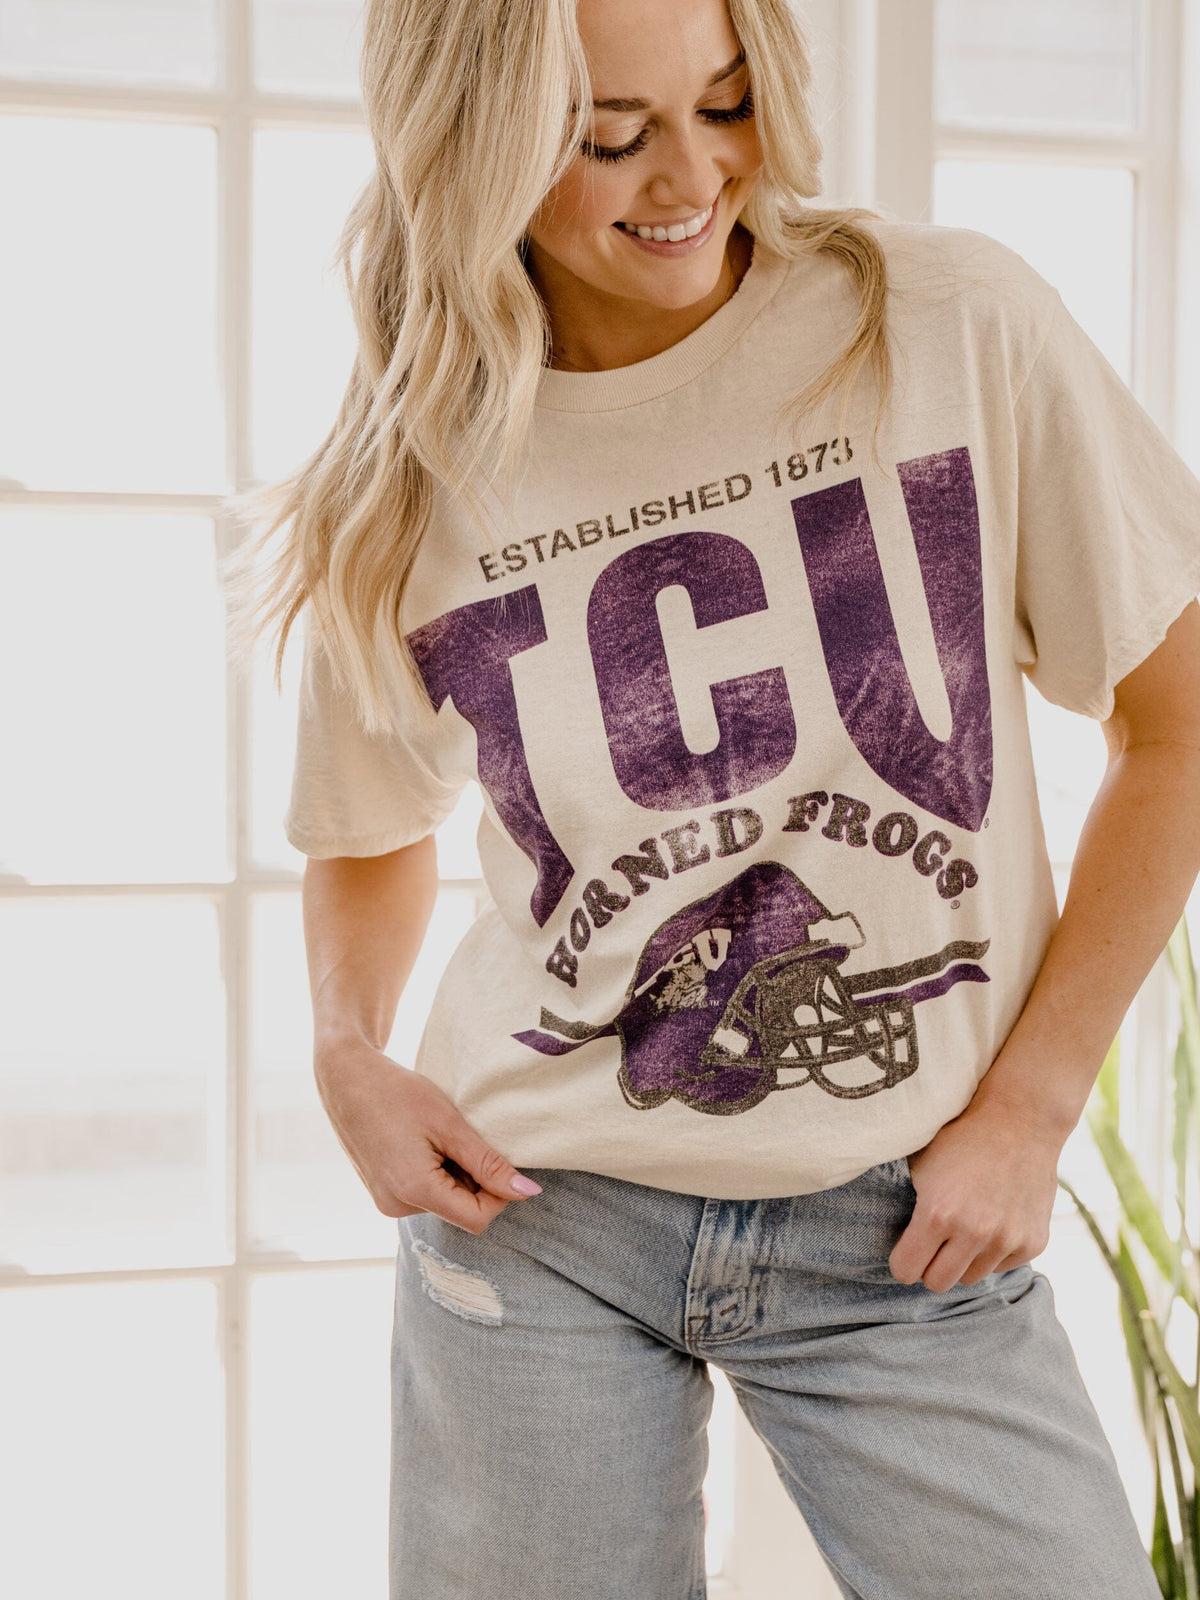 TCU Horned Frogs Established Date Helmet Off White Thrifted Tee